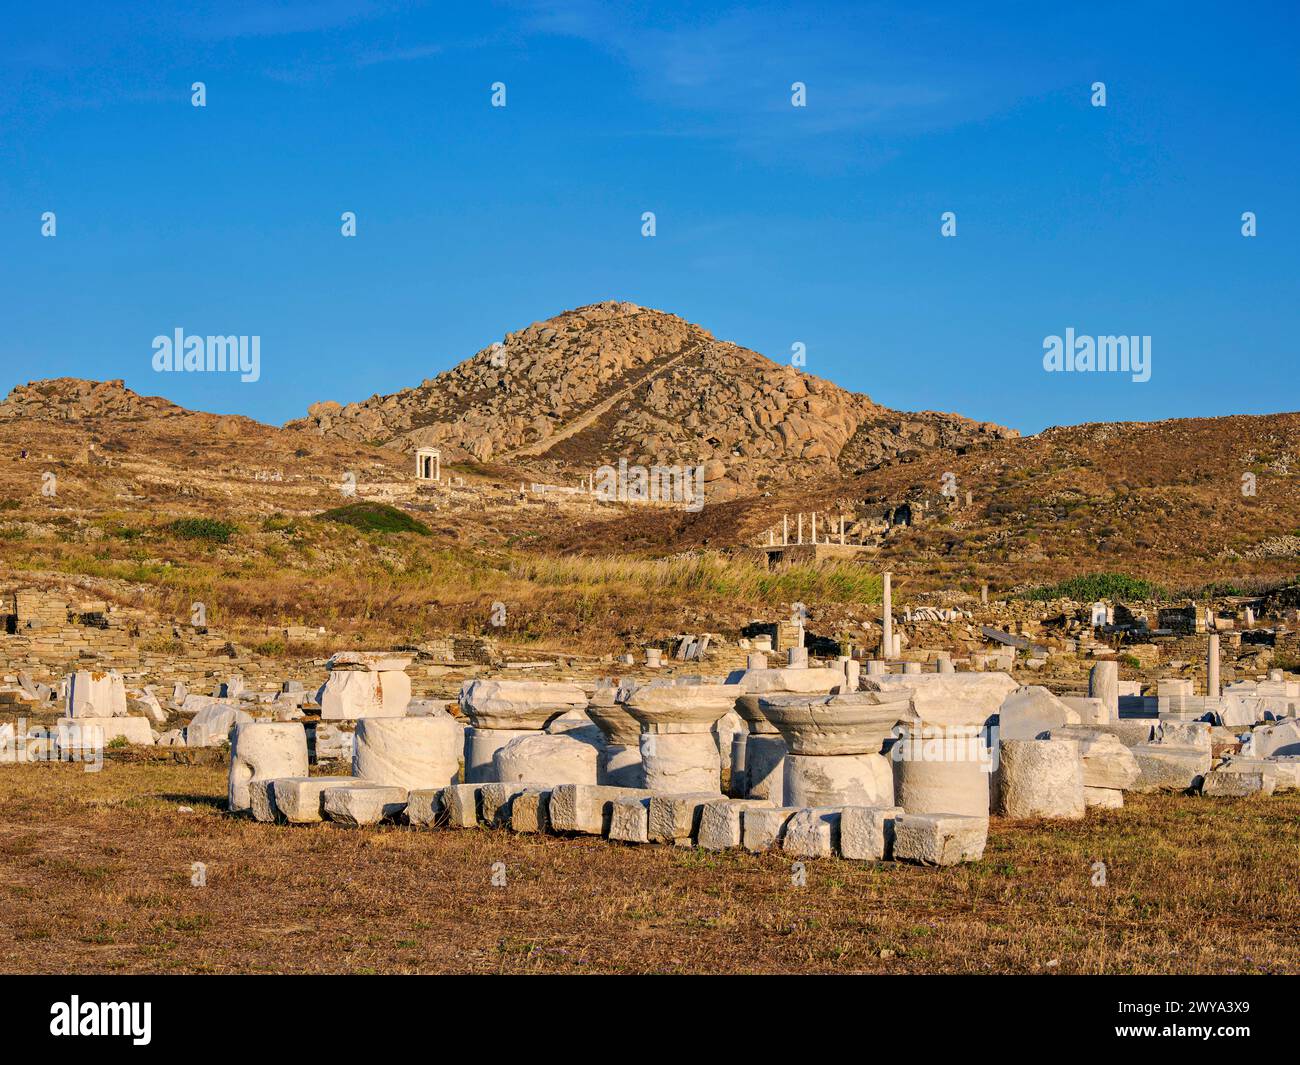 View towards the Mount Kynthos at sunset, Delos Archaeological Site, UNESCO World Heritage Site, Delos Island, Cyclades, Greek Islands, Greece, Europe Stock Photo